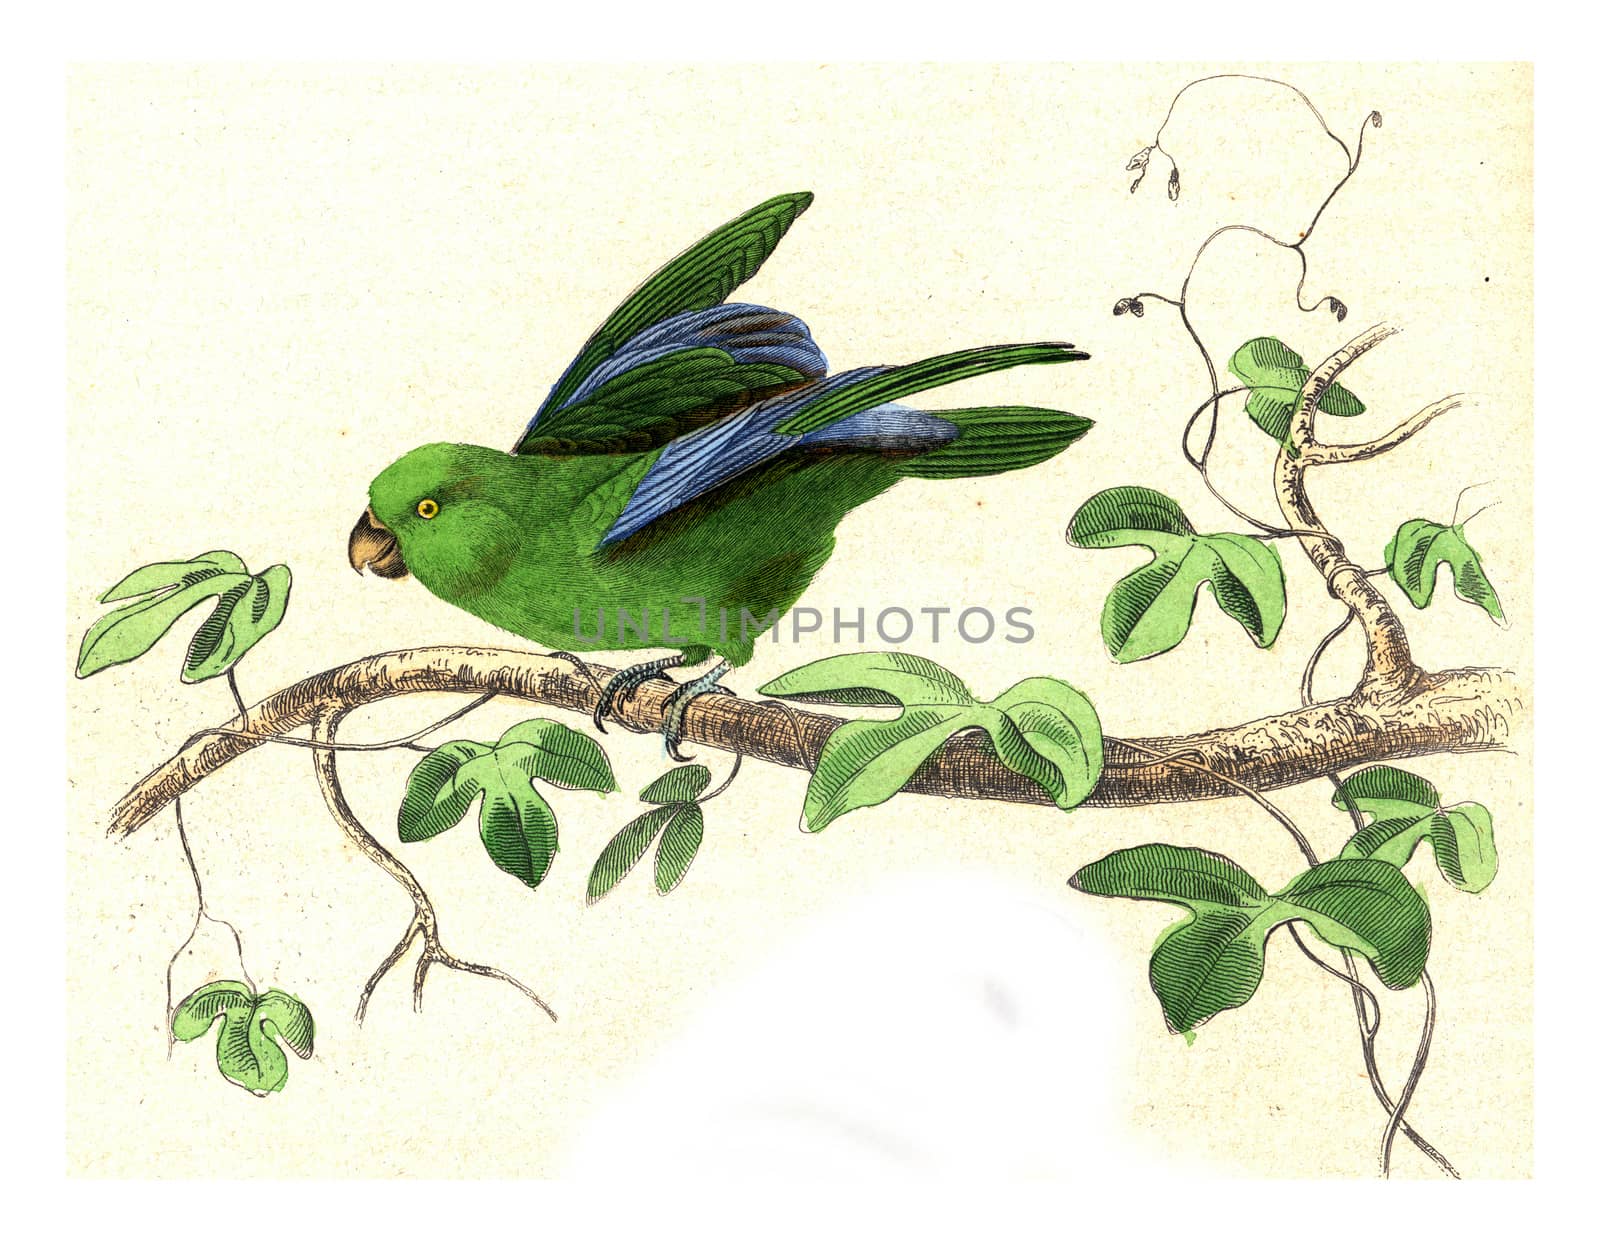 Parakeet all year, vintage engraved illustration. From Buffon Complete Work.
